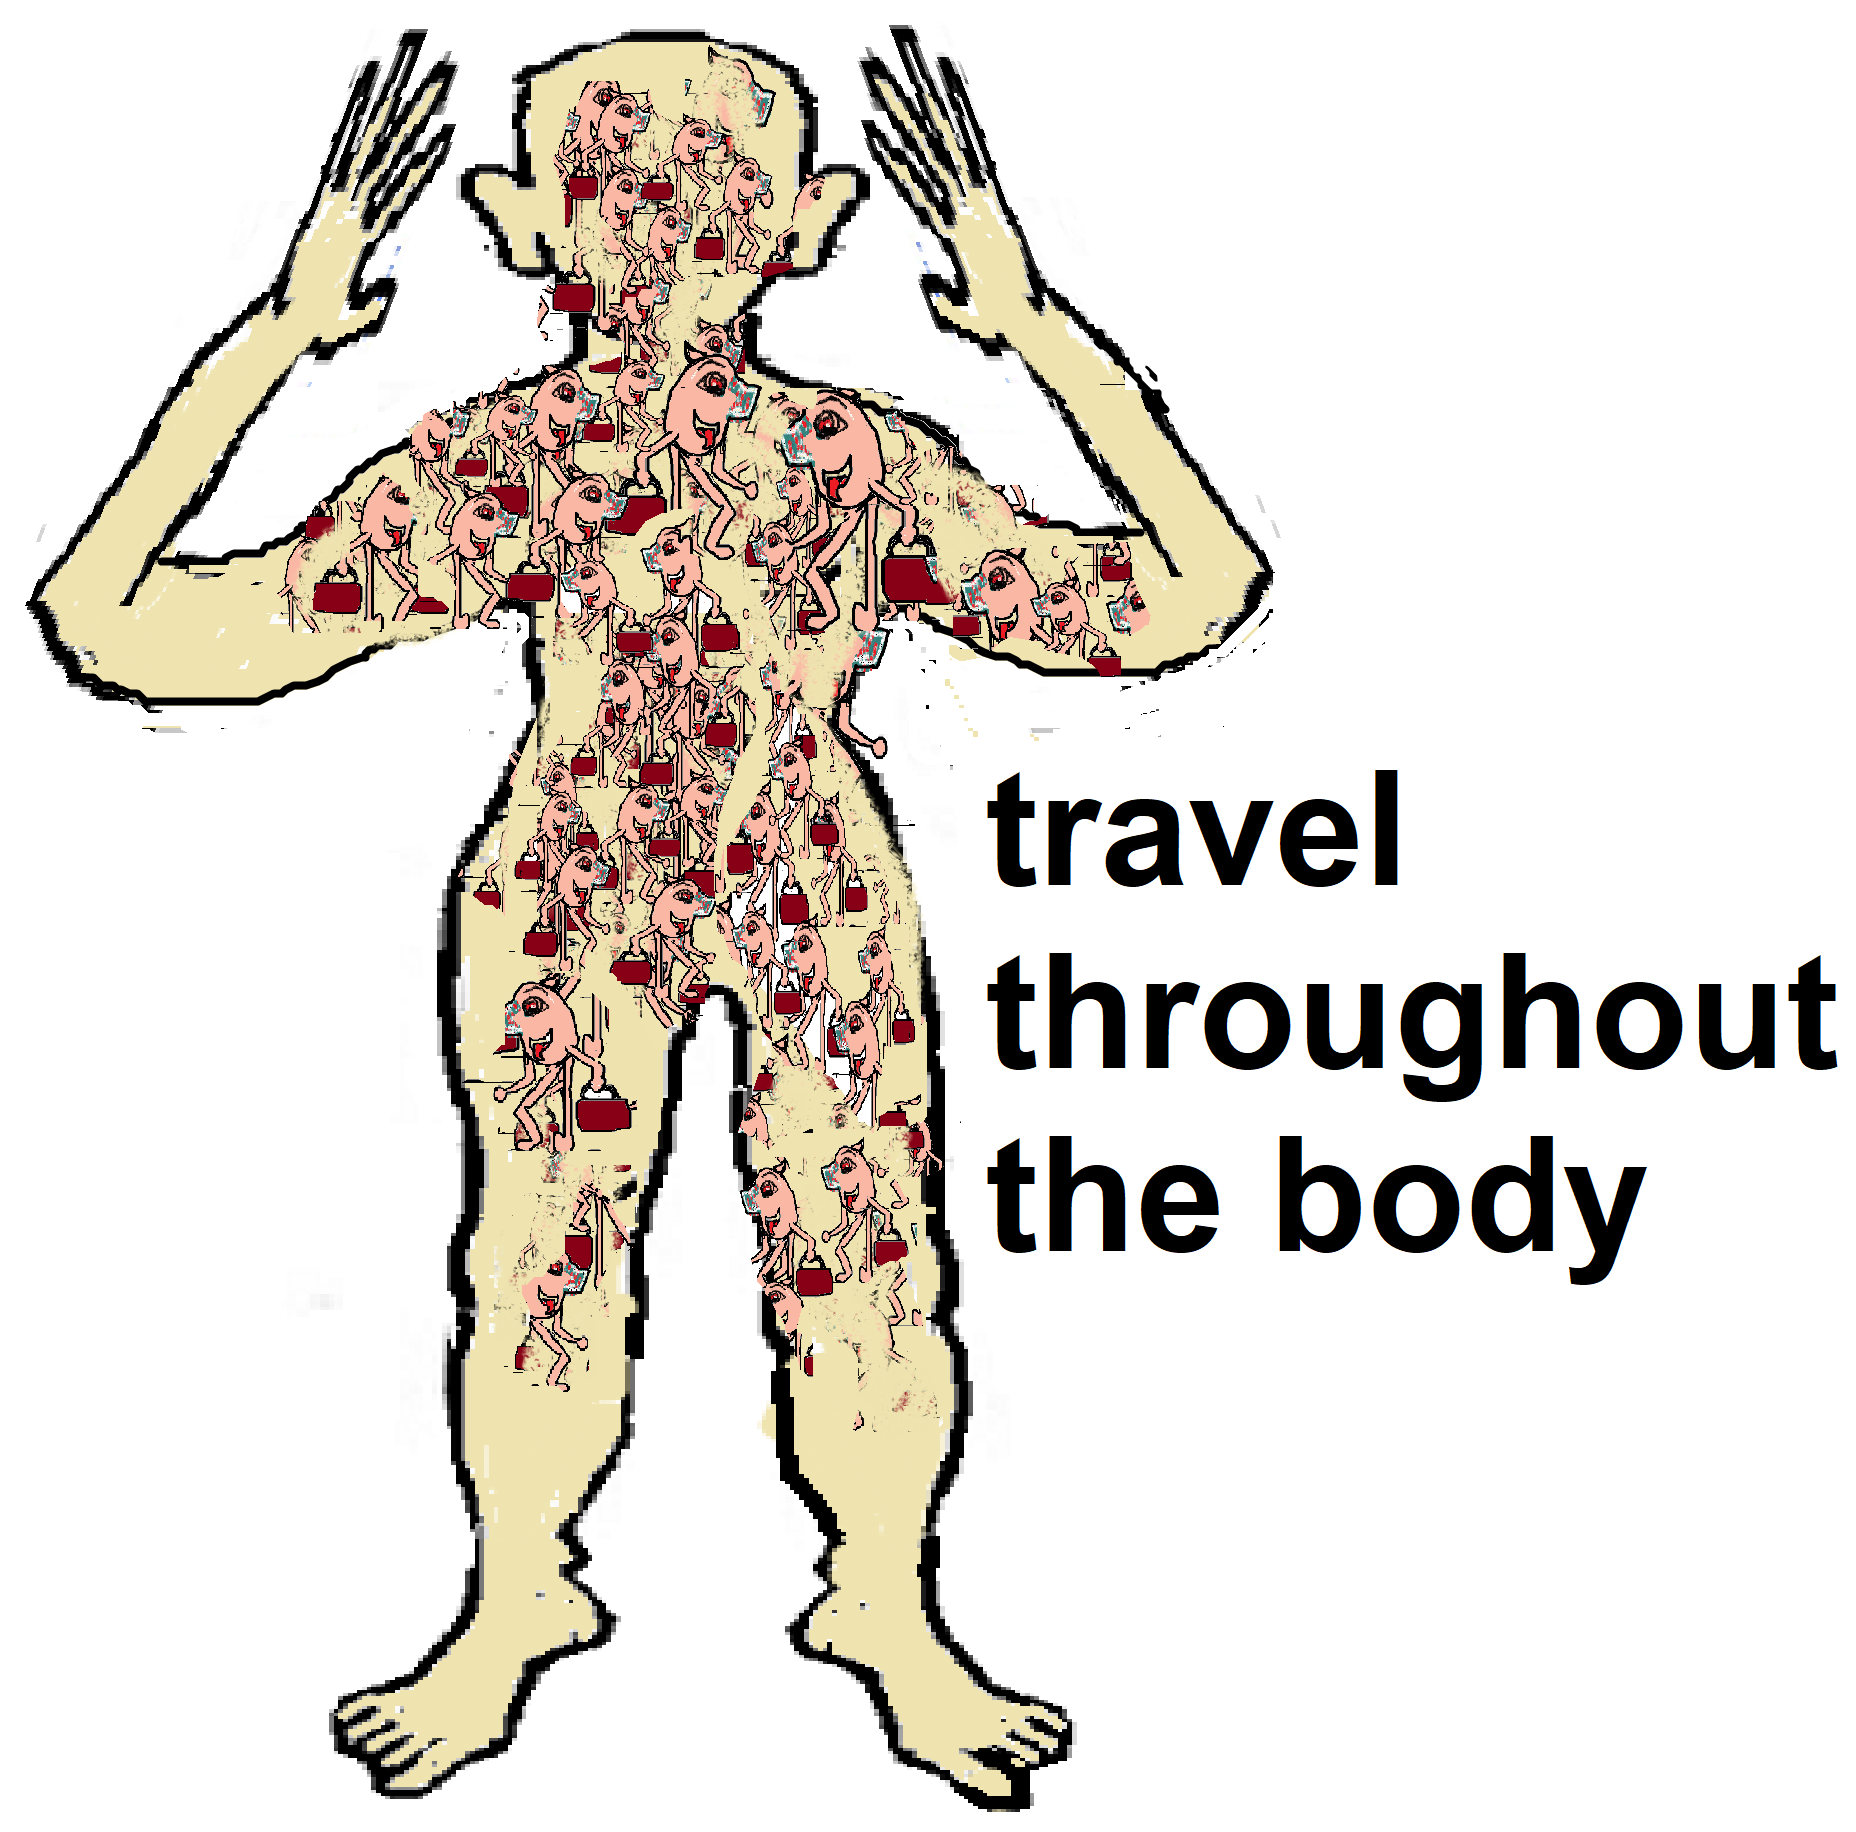 travel throughout the body